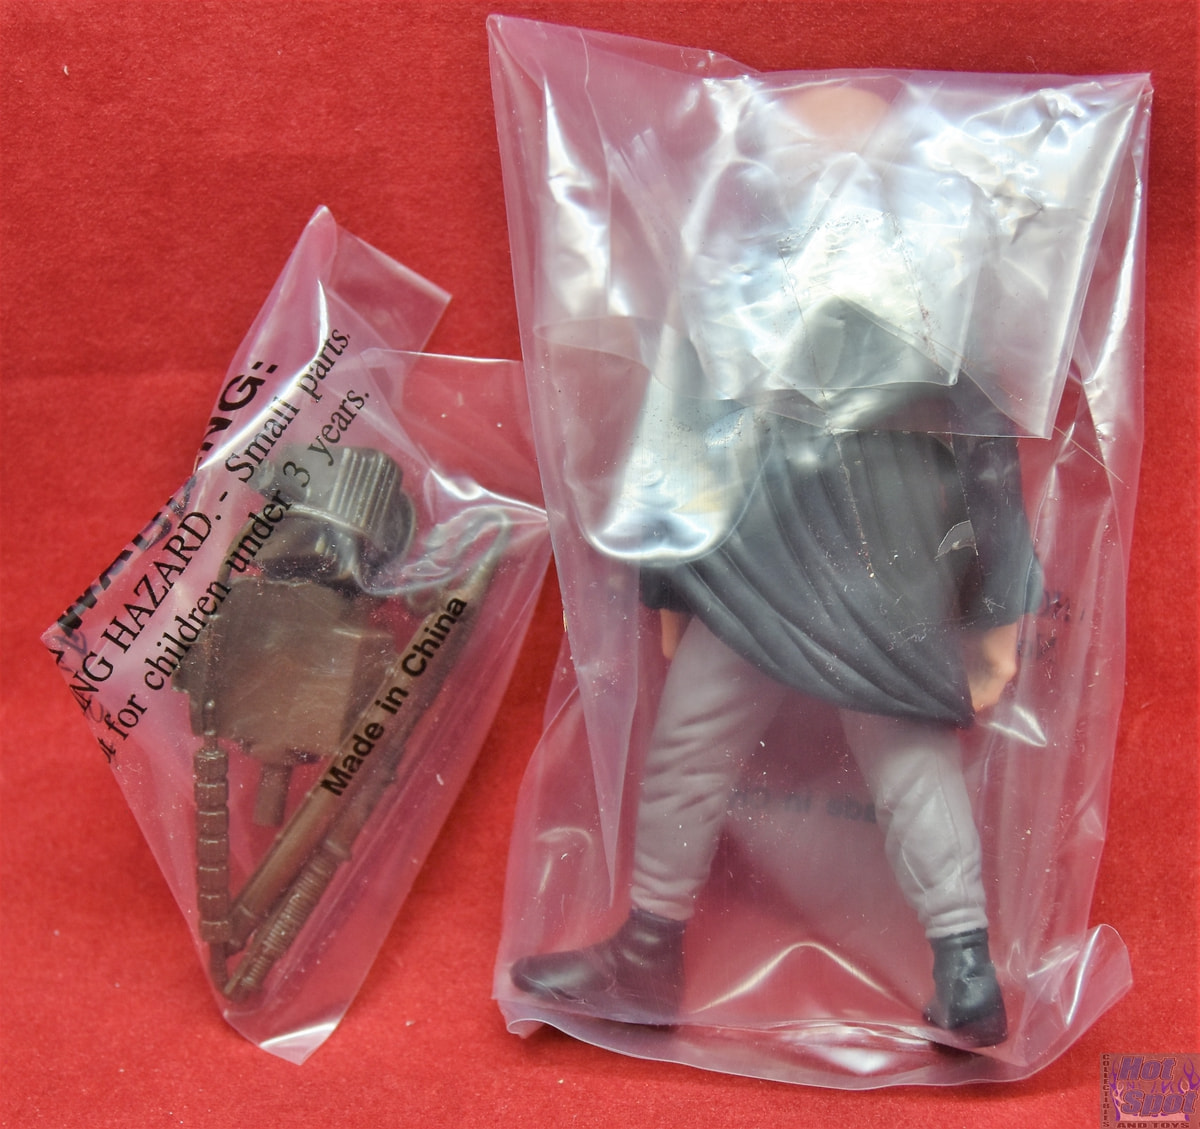 Star Wars Cantina Band Member MAIL AWAY exclusive 